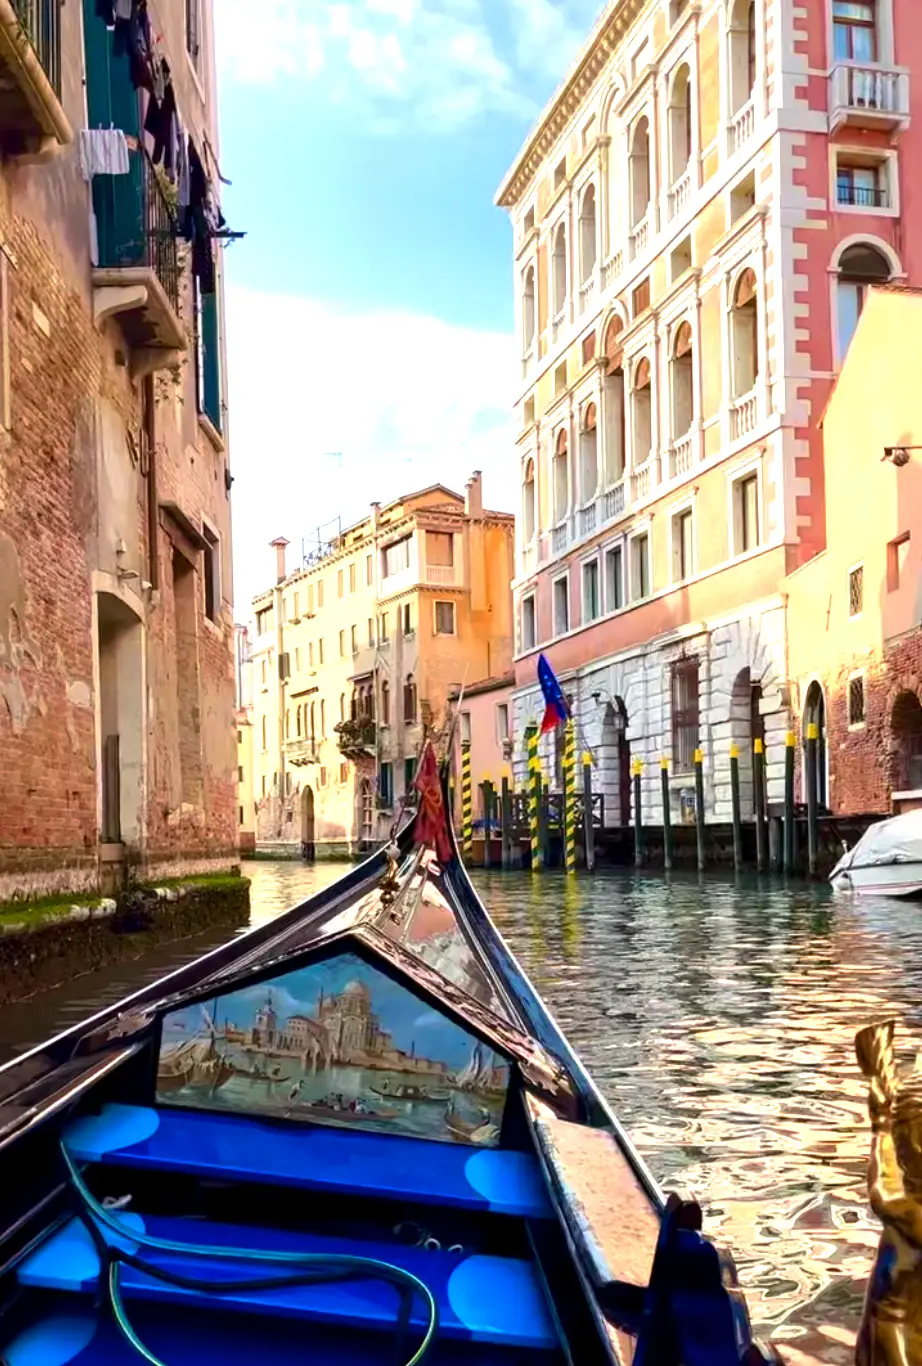 Grand Canal, Italy: How To Reach, Best Time & Tips